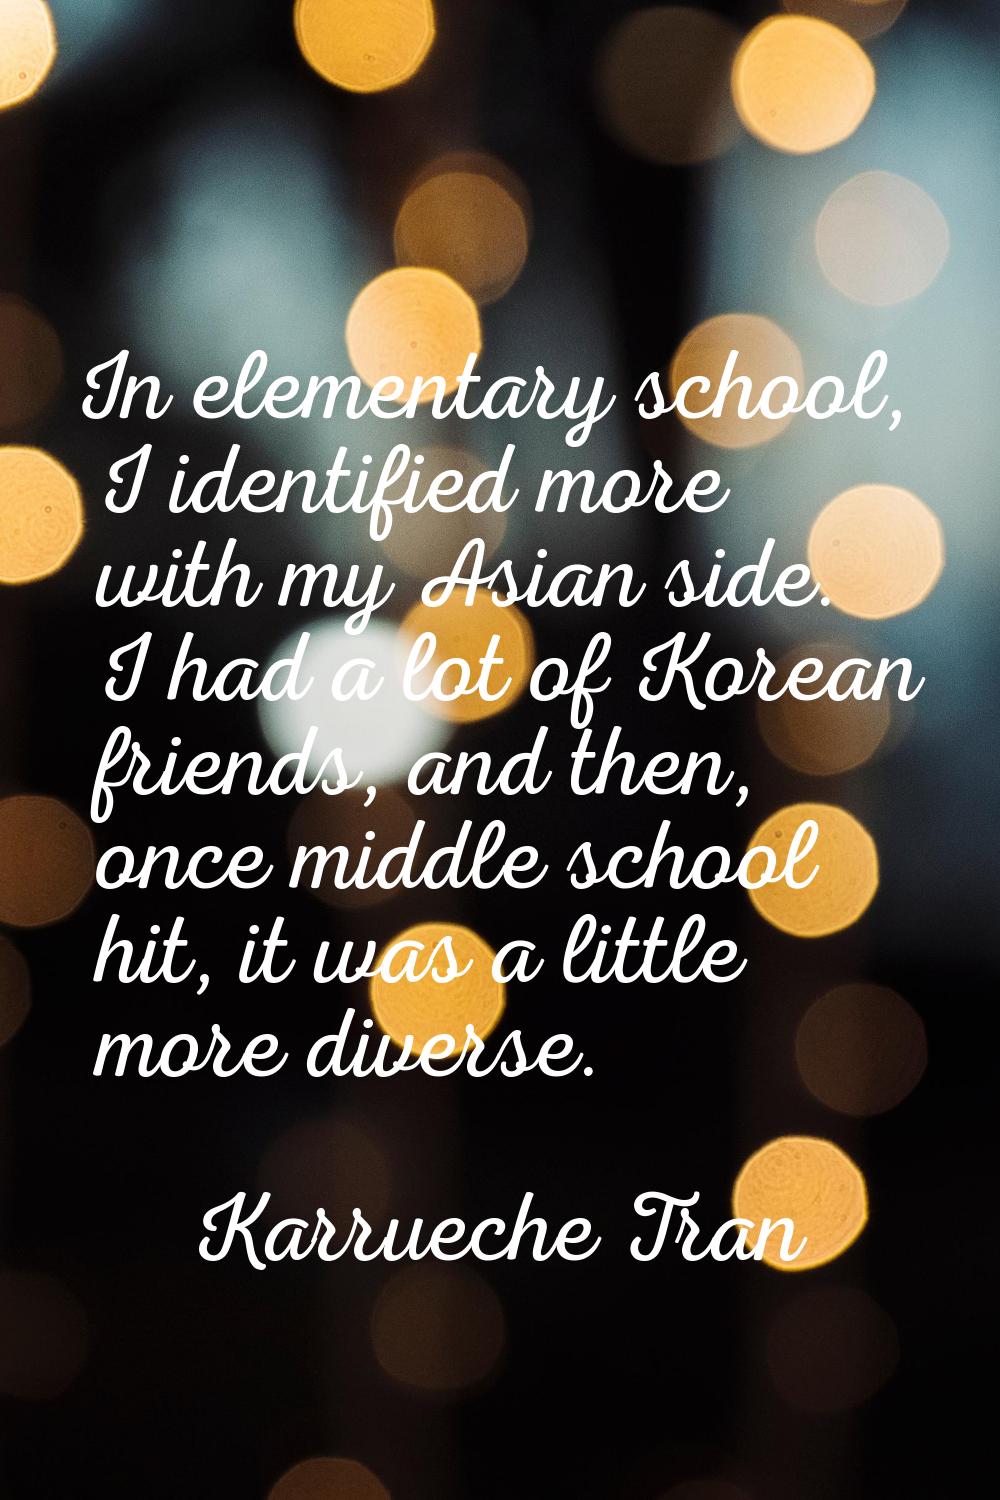 In elementary school, I identified more with my Asian side. I had a lot of Korean friends, and then